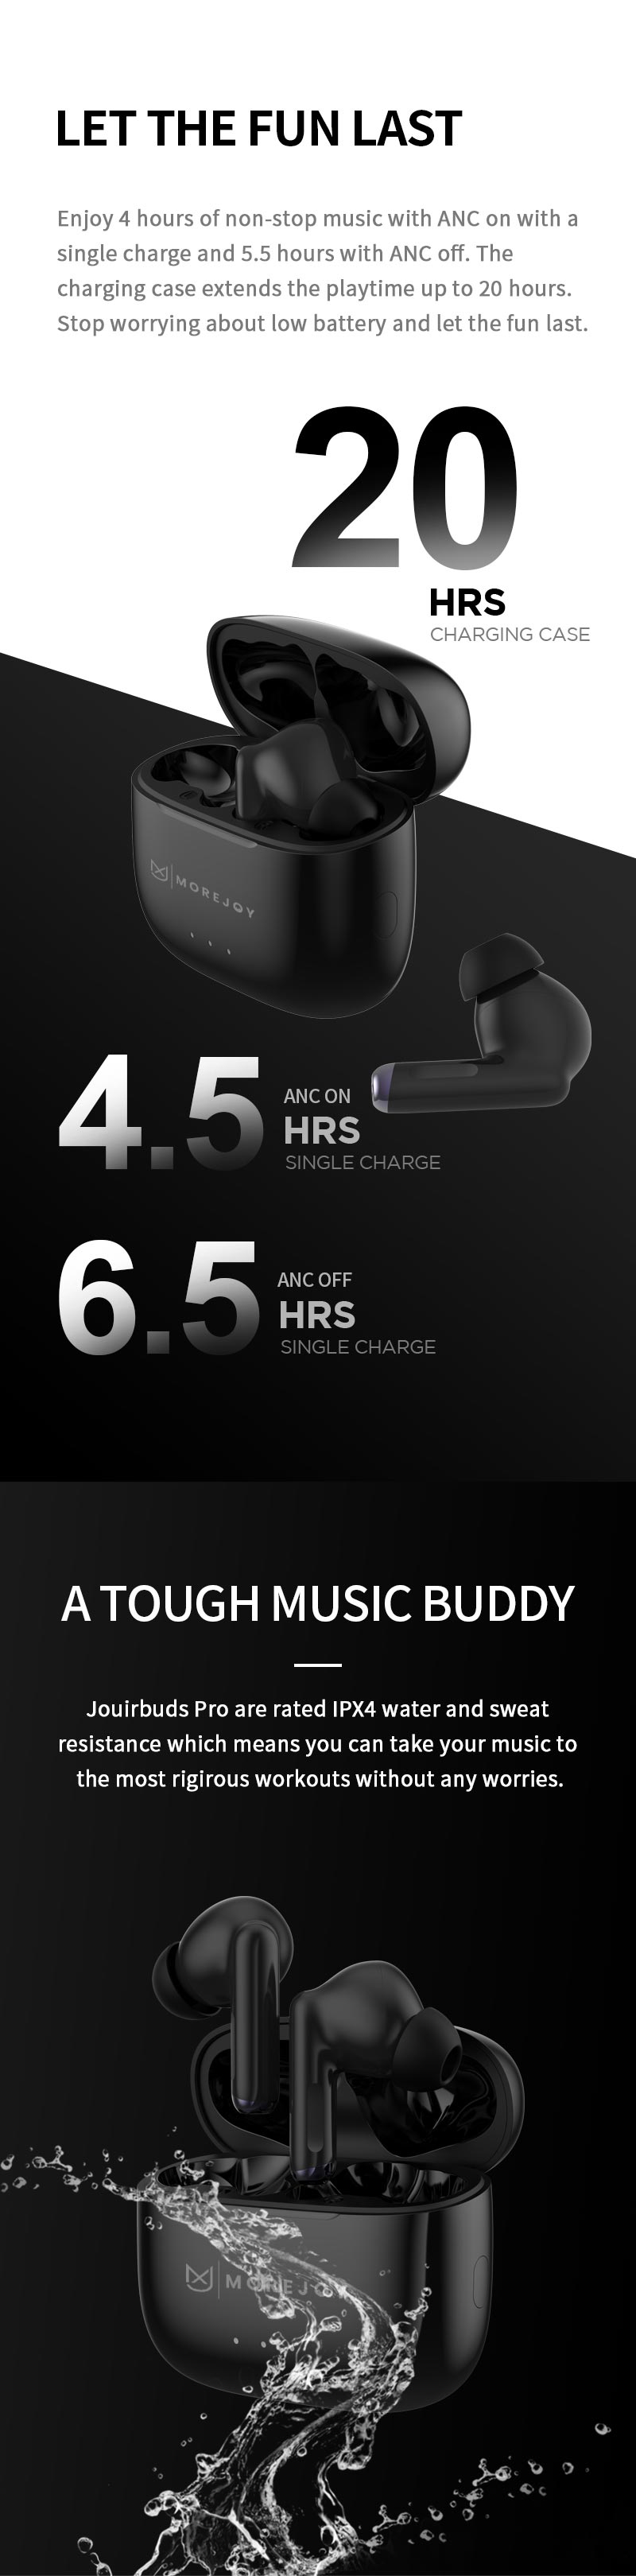 MoreJoy-MJ141Black-Jouirbuds-Pro-Hybrid-ANC-Wireless-Earbuds-Active-Noise-Cancelling-Headphones-Bluetooth-5-2-Stereo-in-Ear-Earphones-Immersive-Sound-37